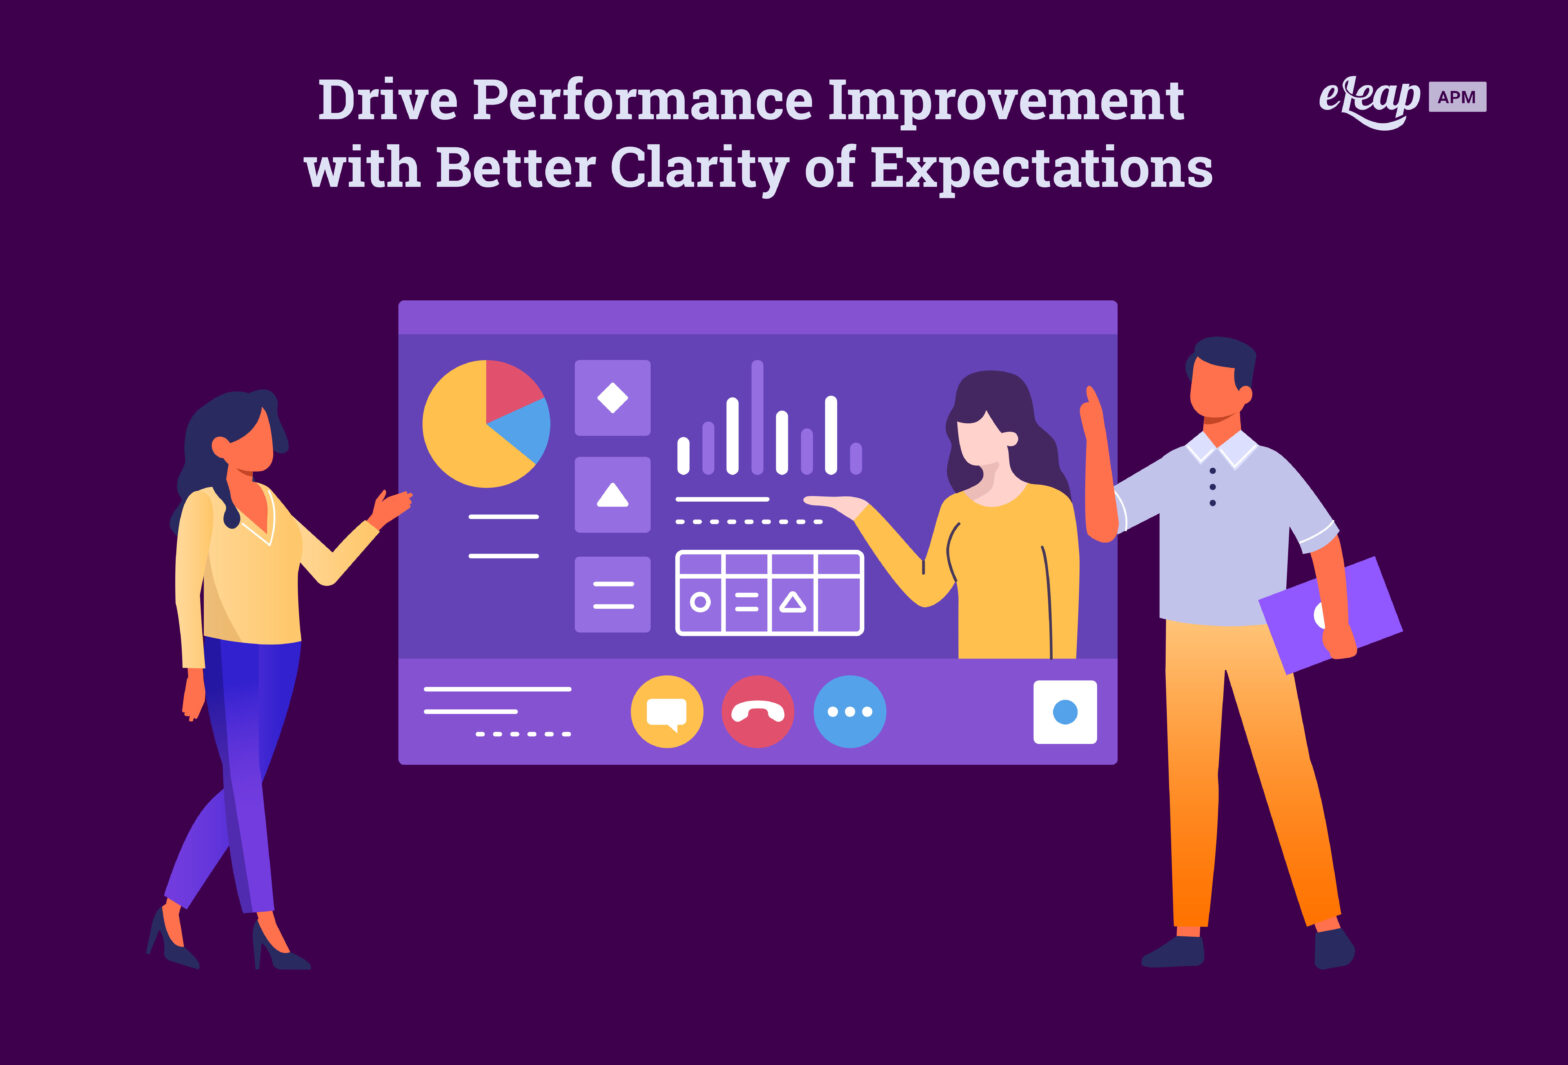 Drive Performance Improvement with Better Clarity of Expectations